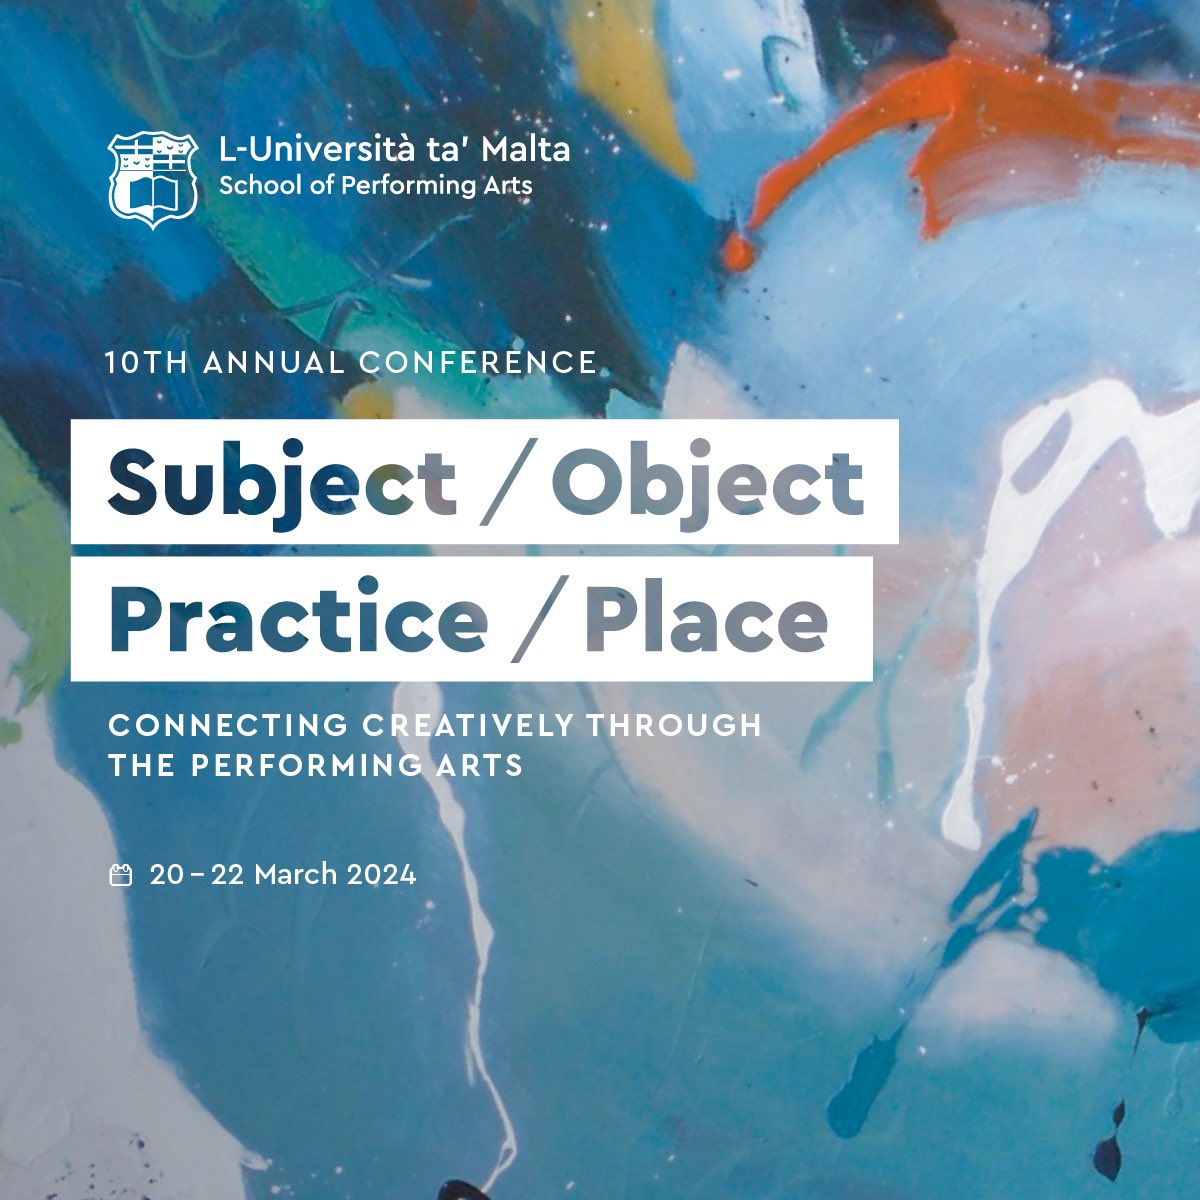 CALL FOR PROPOSALS! Subject/Object/Practice/Place Connecting Creatively through the Performing Arts 10th Annual Conference by School of Performing Arts at UoM! Our conference website is live at um.edu.mt/events/spa2024/ Deadline is December 1, 2023! #spaconference24